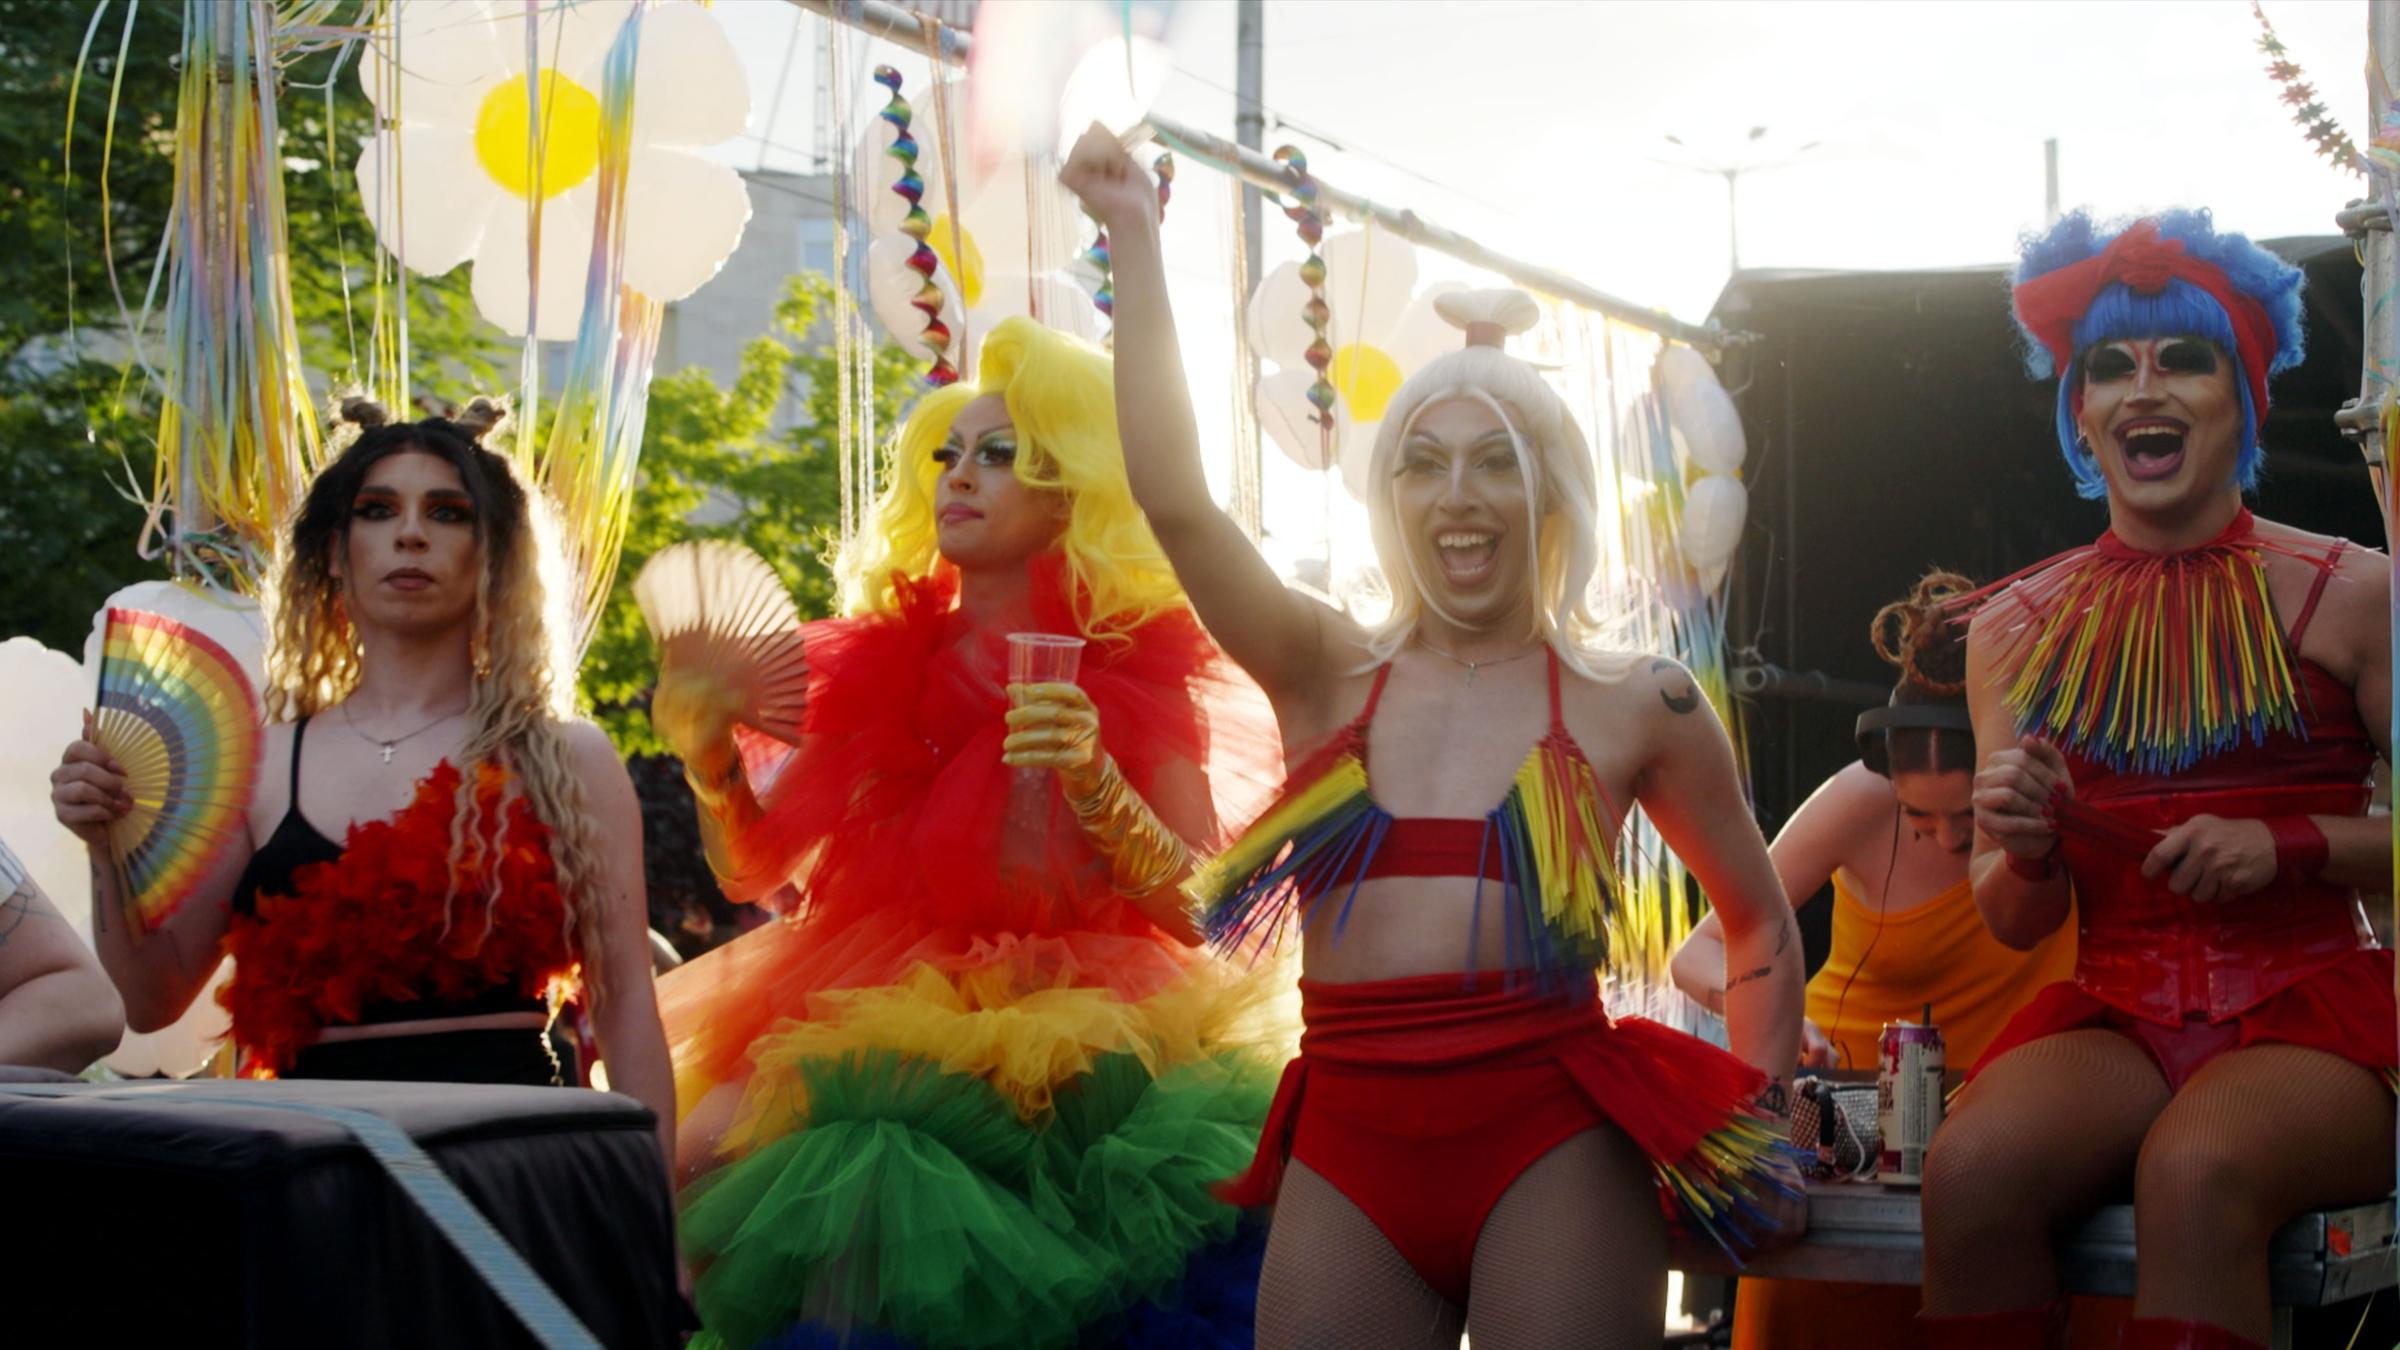 Four transvestites celebrate the Pride Parade on a float.  They wear colorful wigs and costumes.